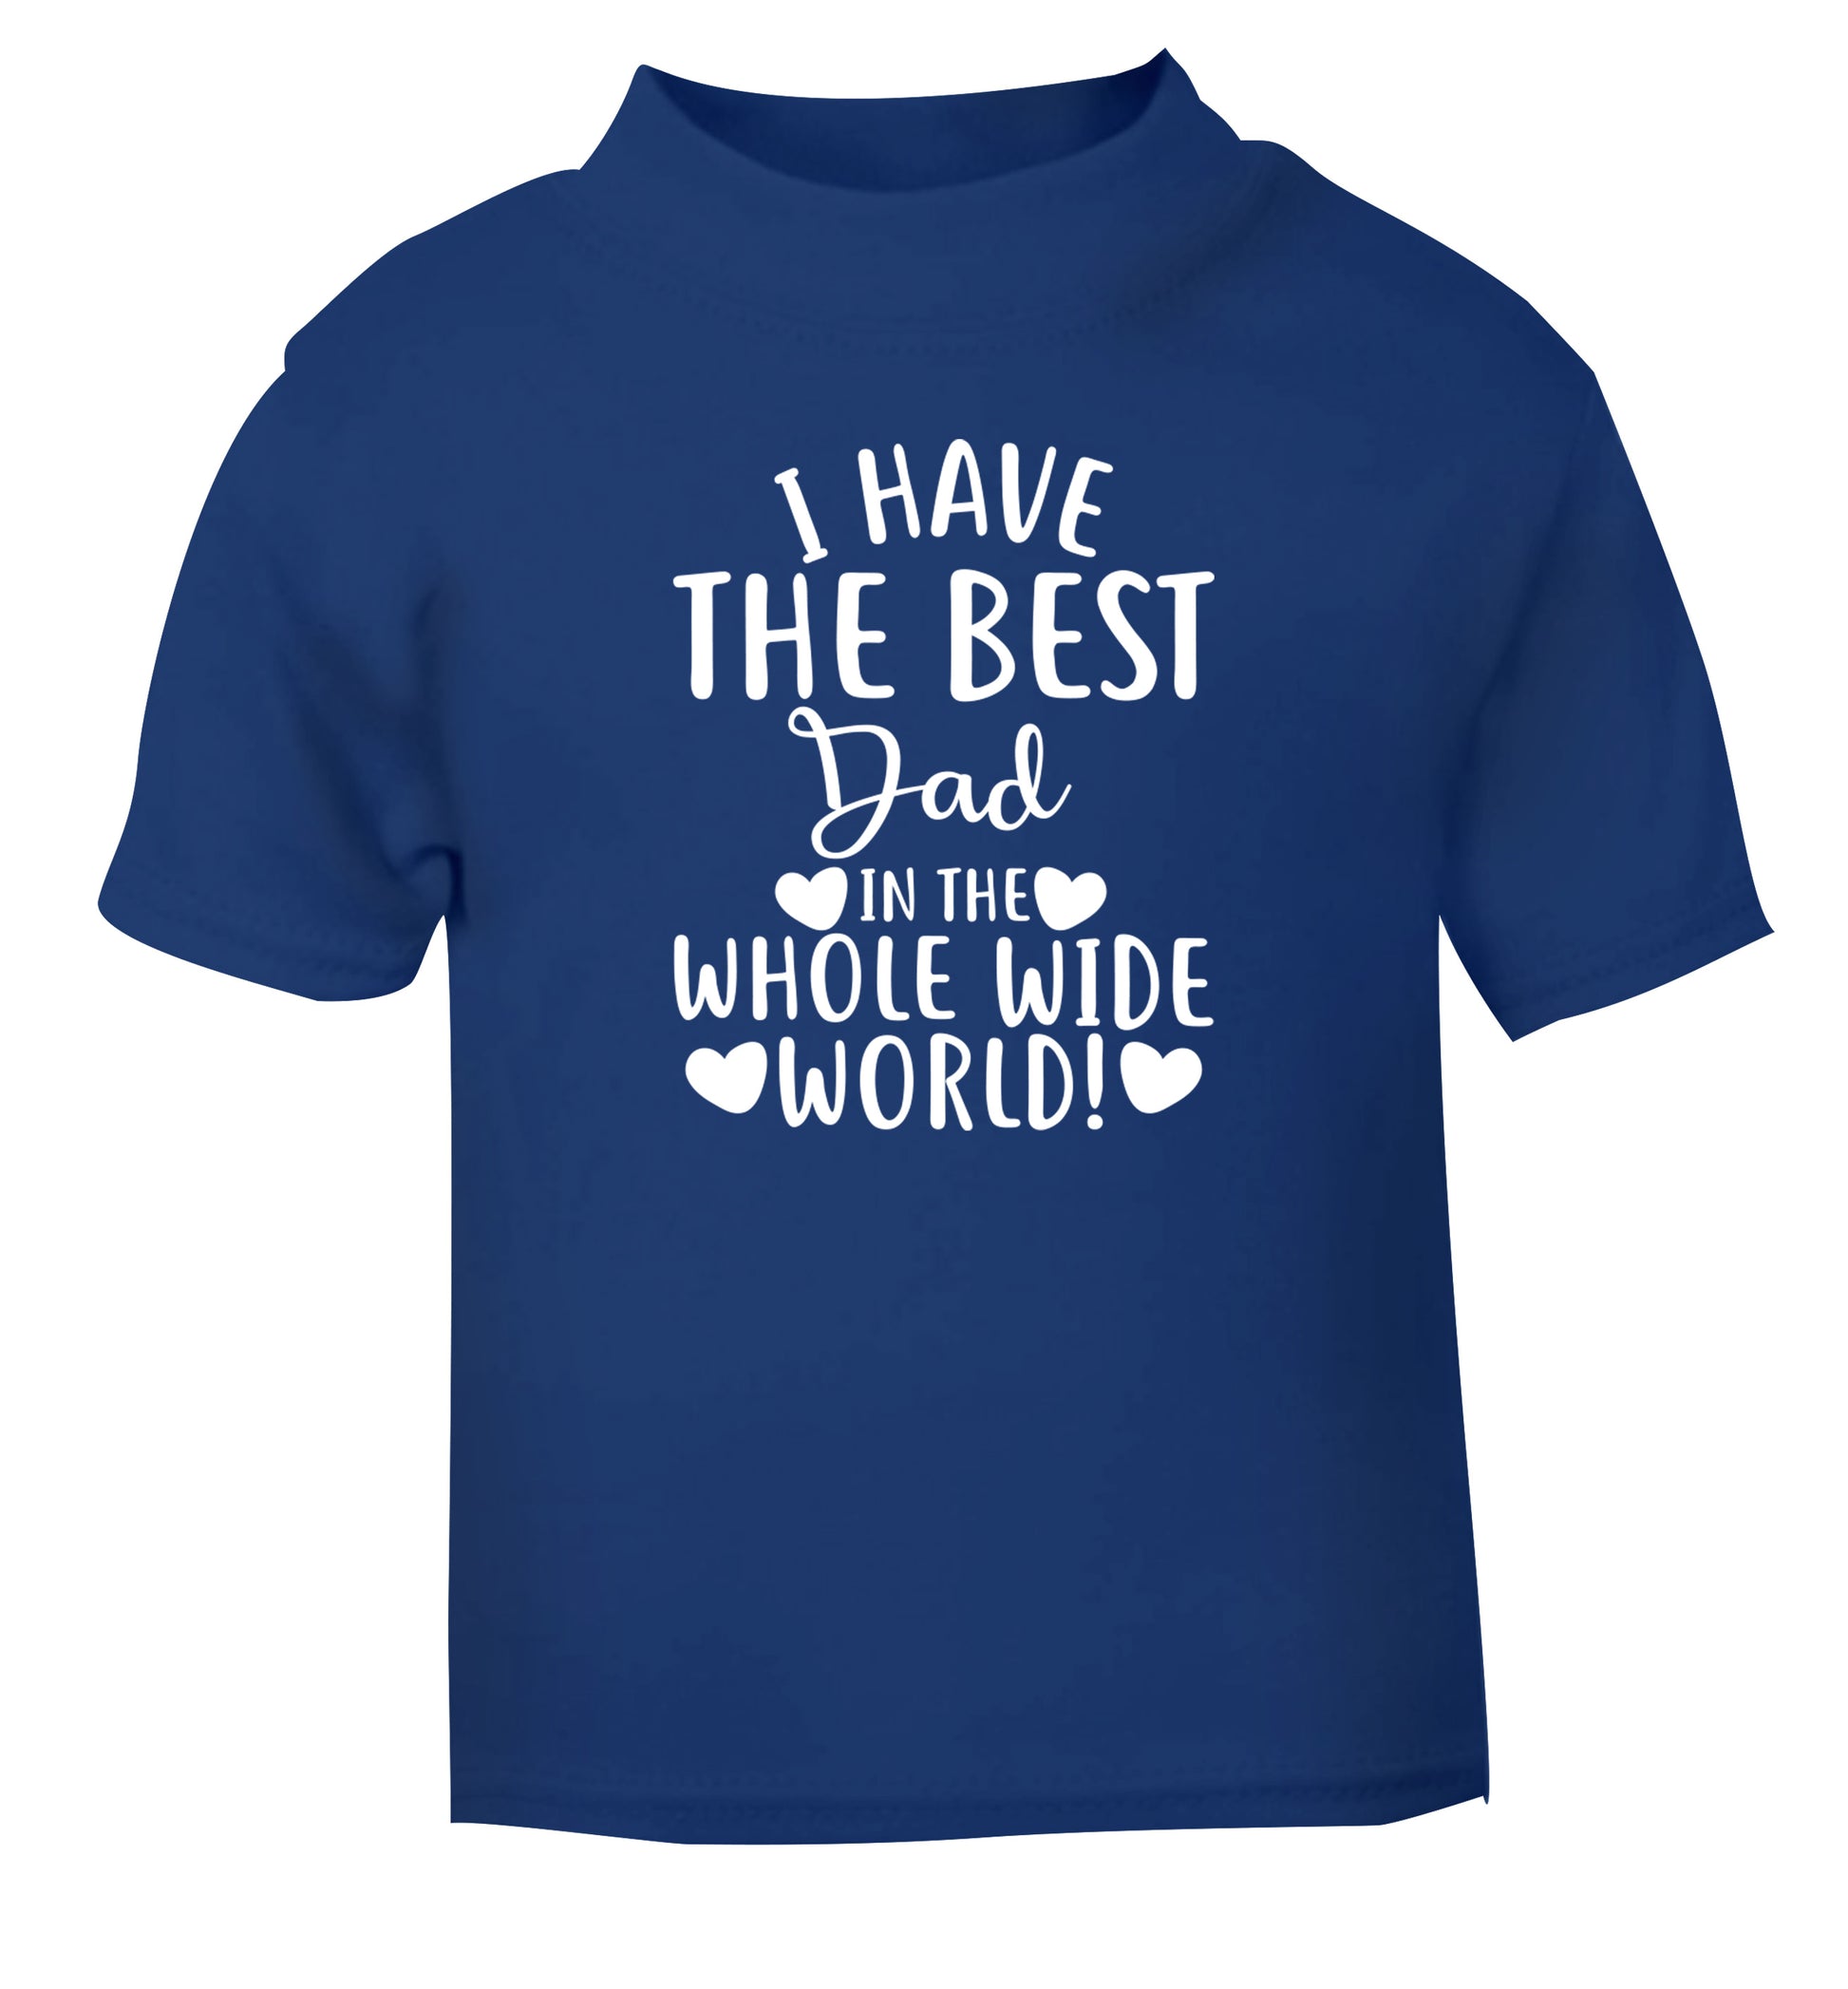 I have the best dad in the whole wide world! blue Baby Toddler Tshirt 2 Years